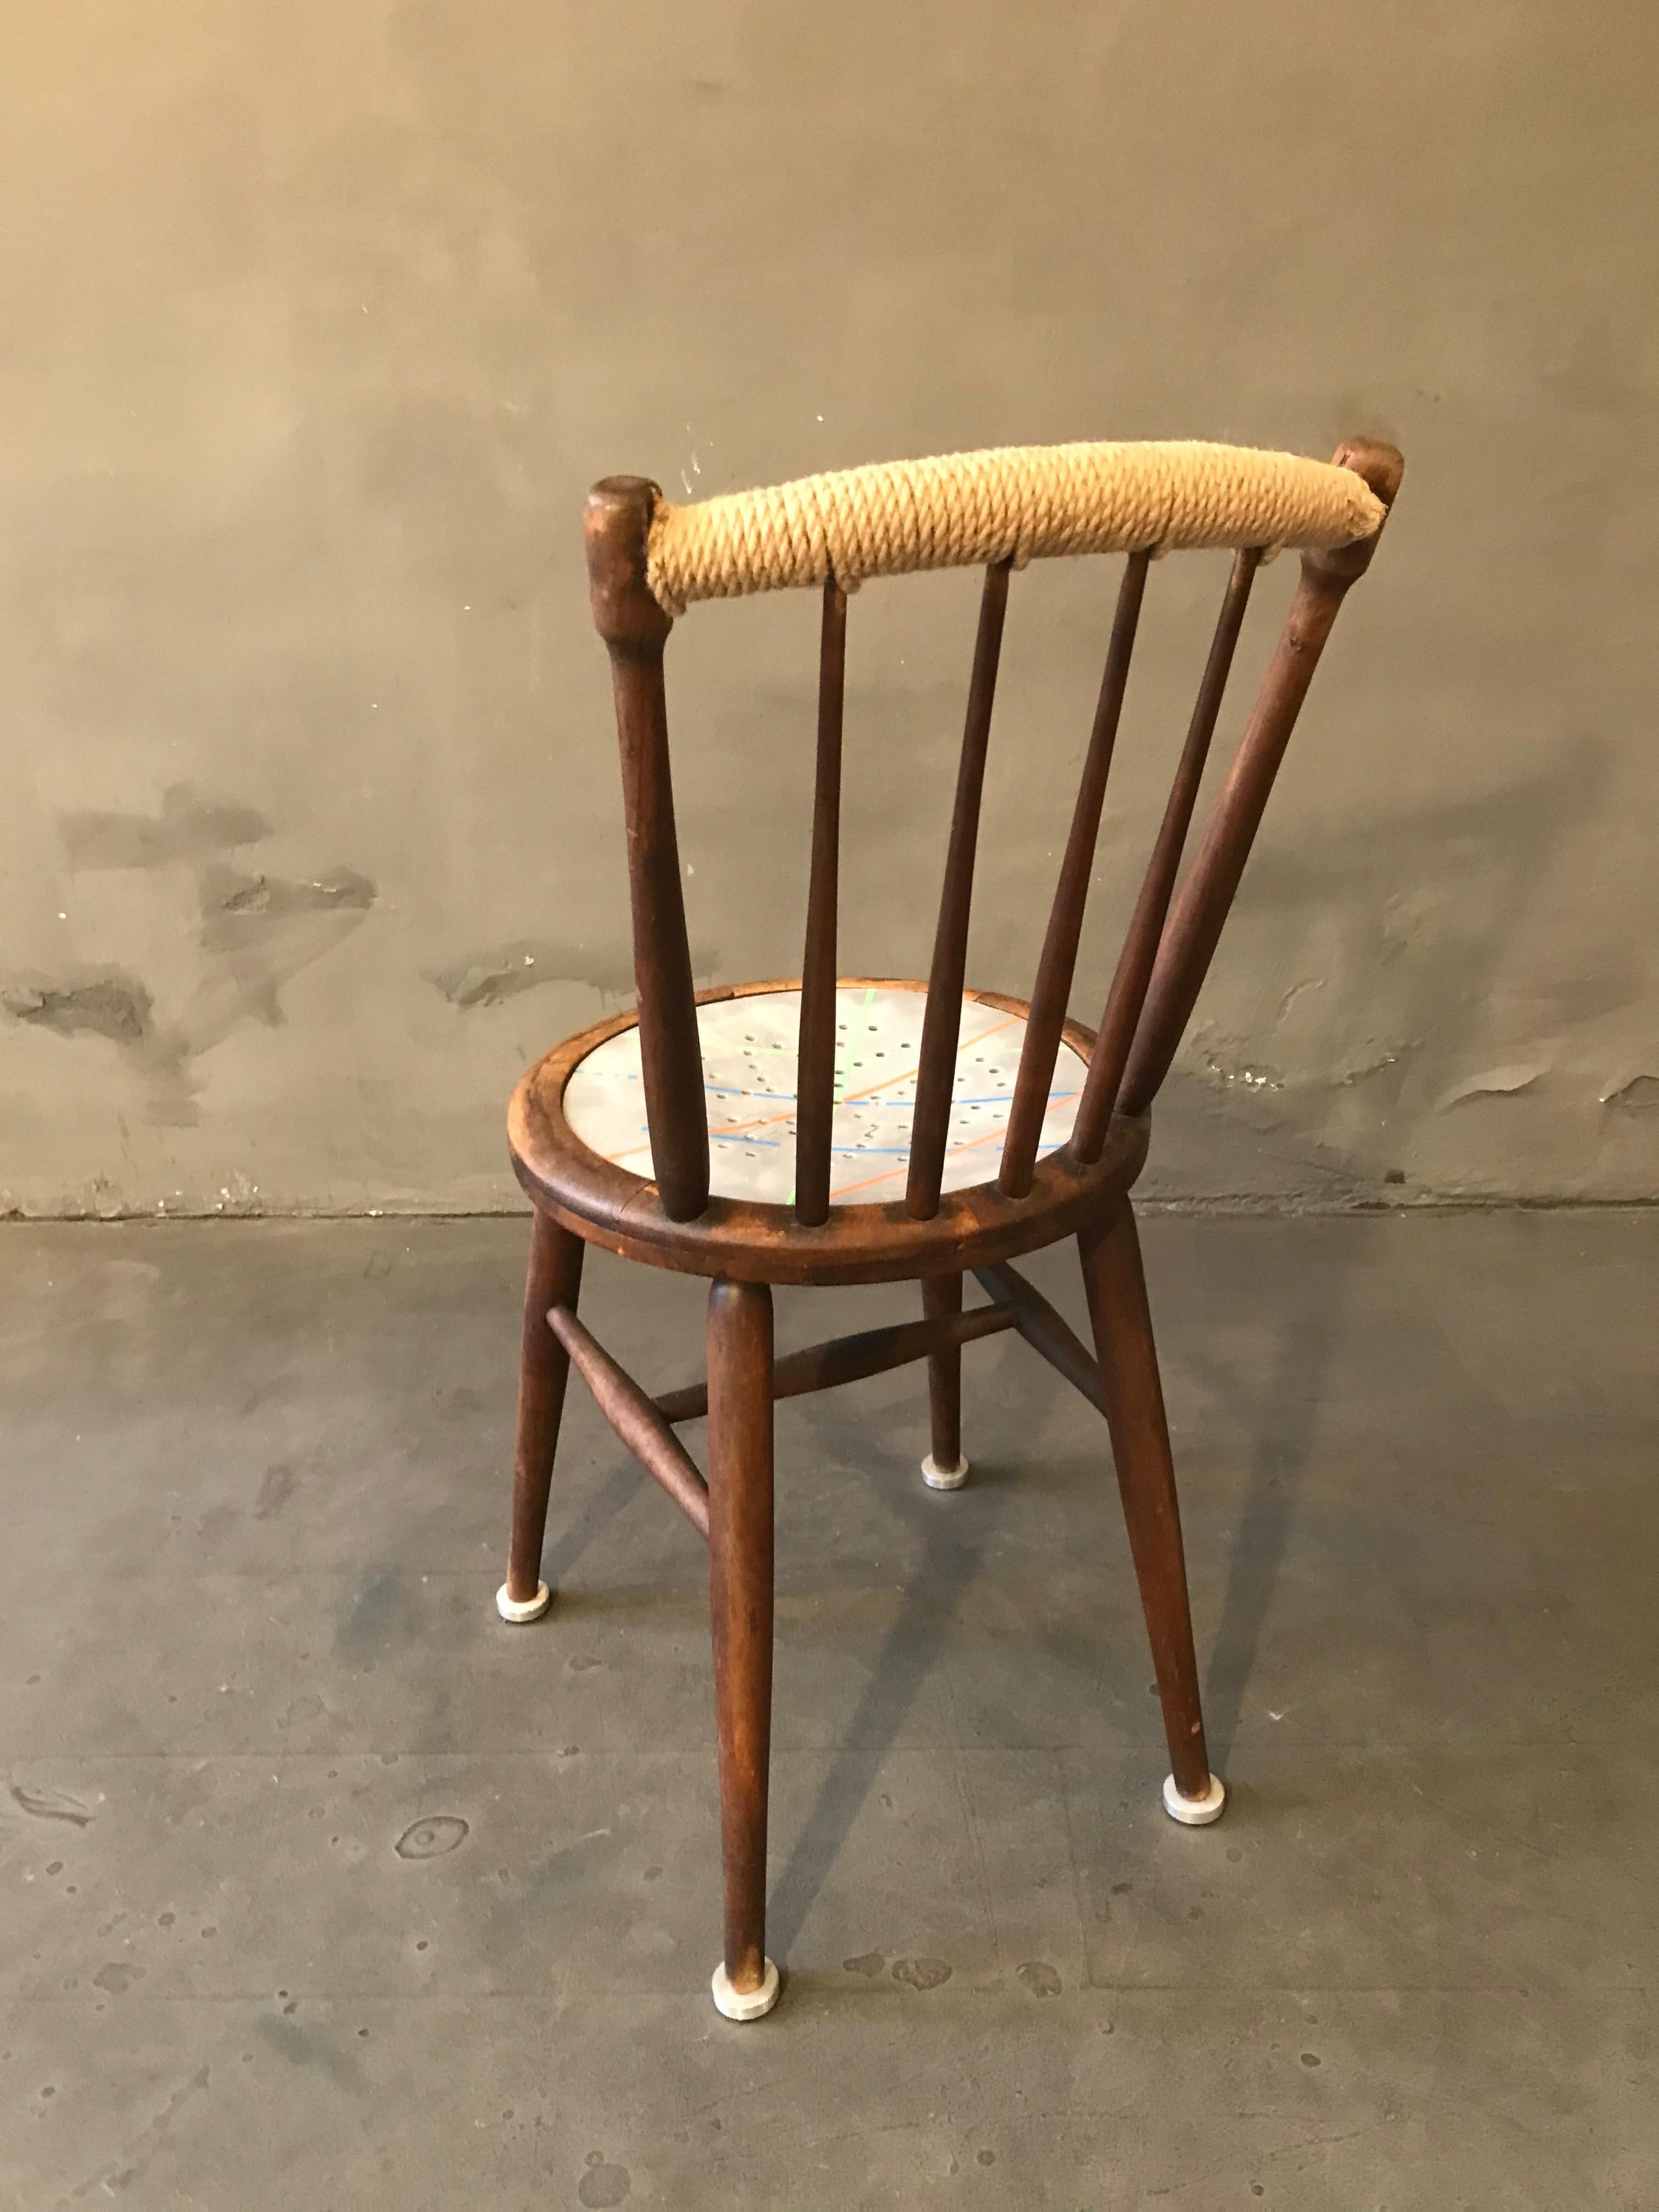 Classic Thonet Chair contemporized by Markus Friedrich Staab, additianal feet added, hand-painted seat multi-lacquered.

I learn out of a past that has been created for me, a foundation to build on my own work
And create new pathes of art, design